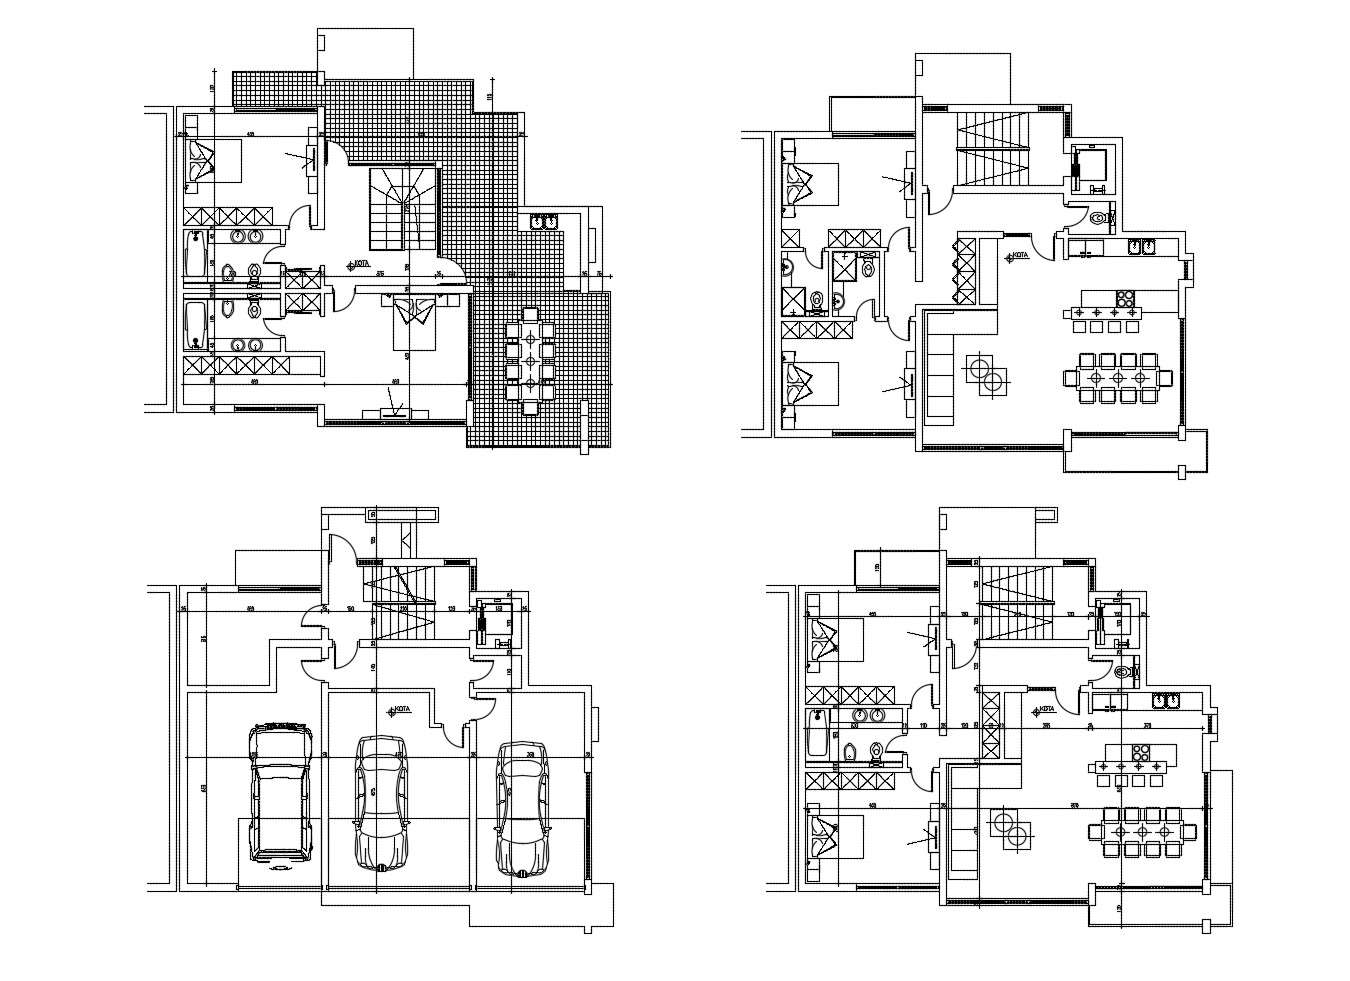  House  plan  with furniture  detail in autocad  Cadbull